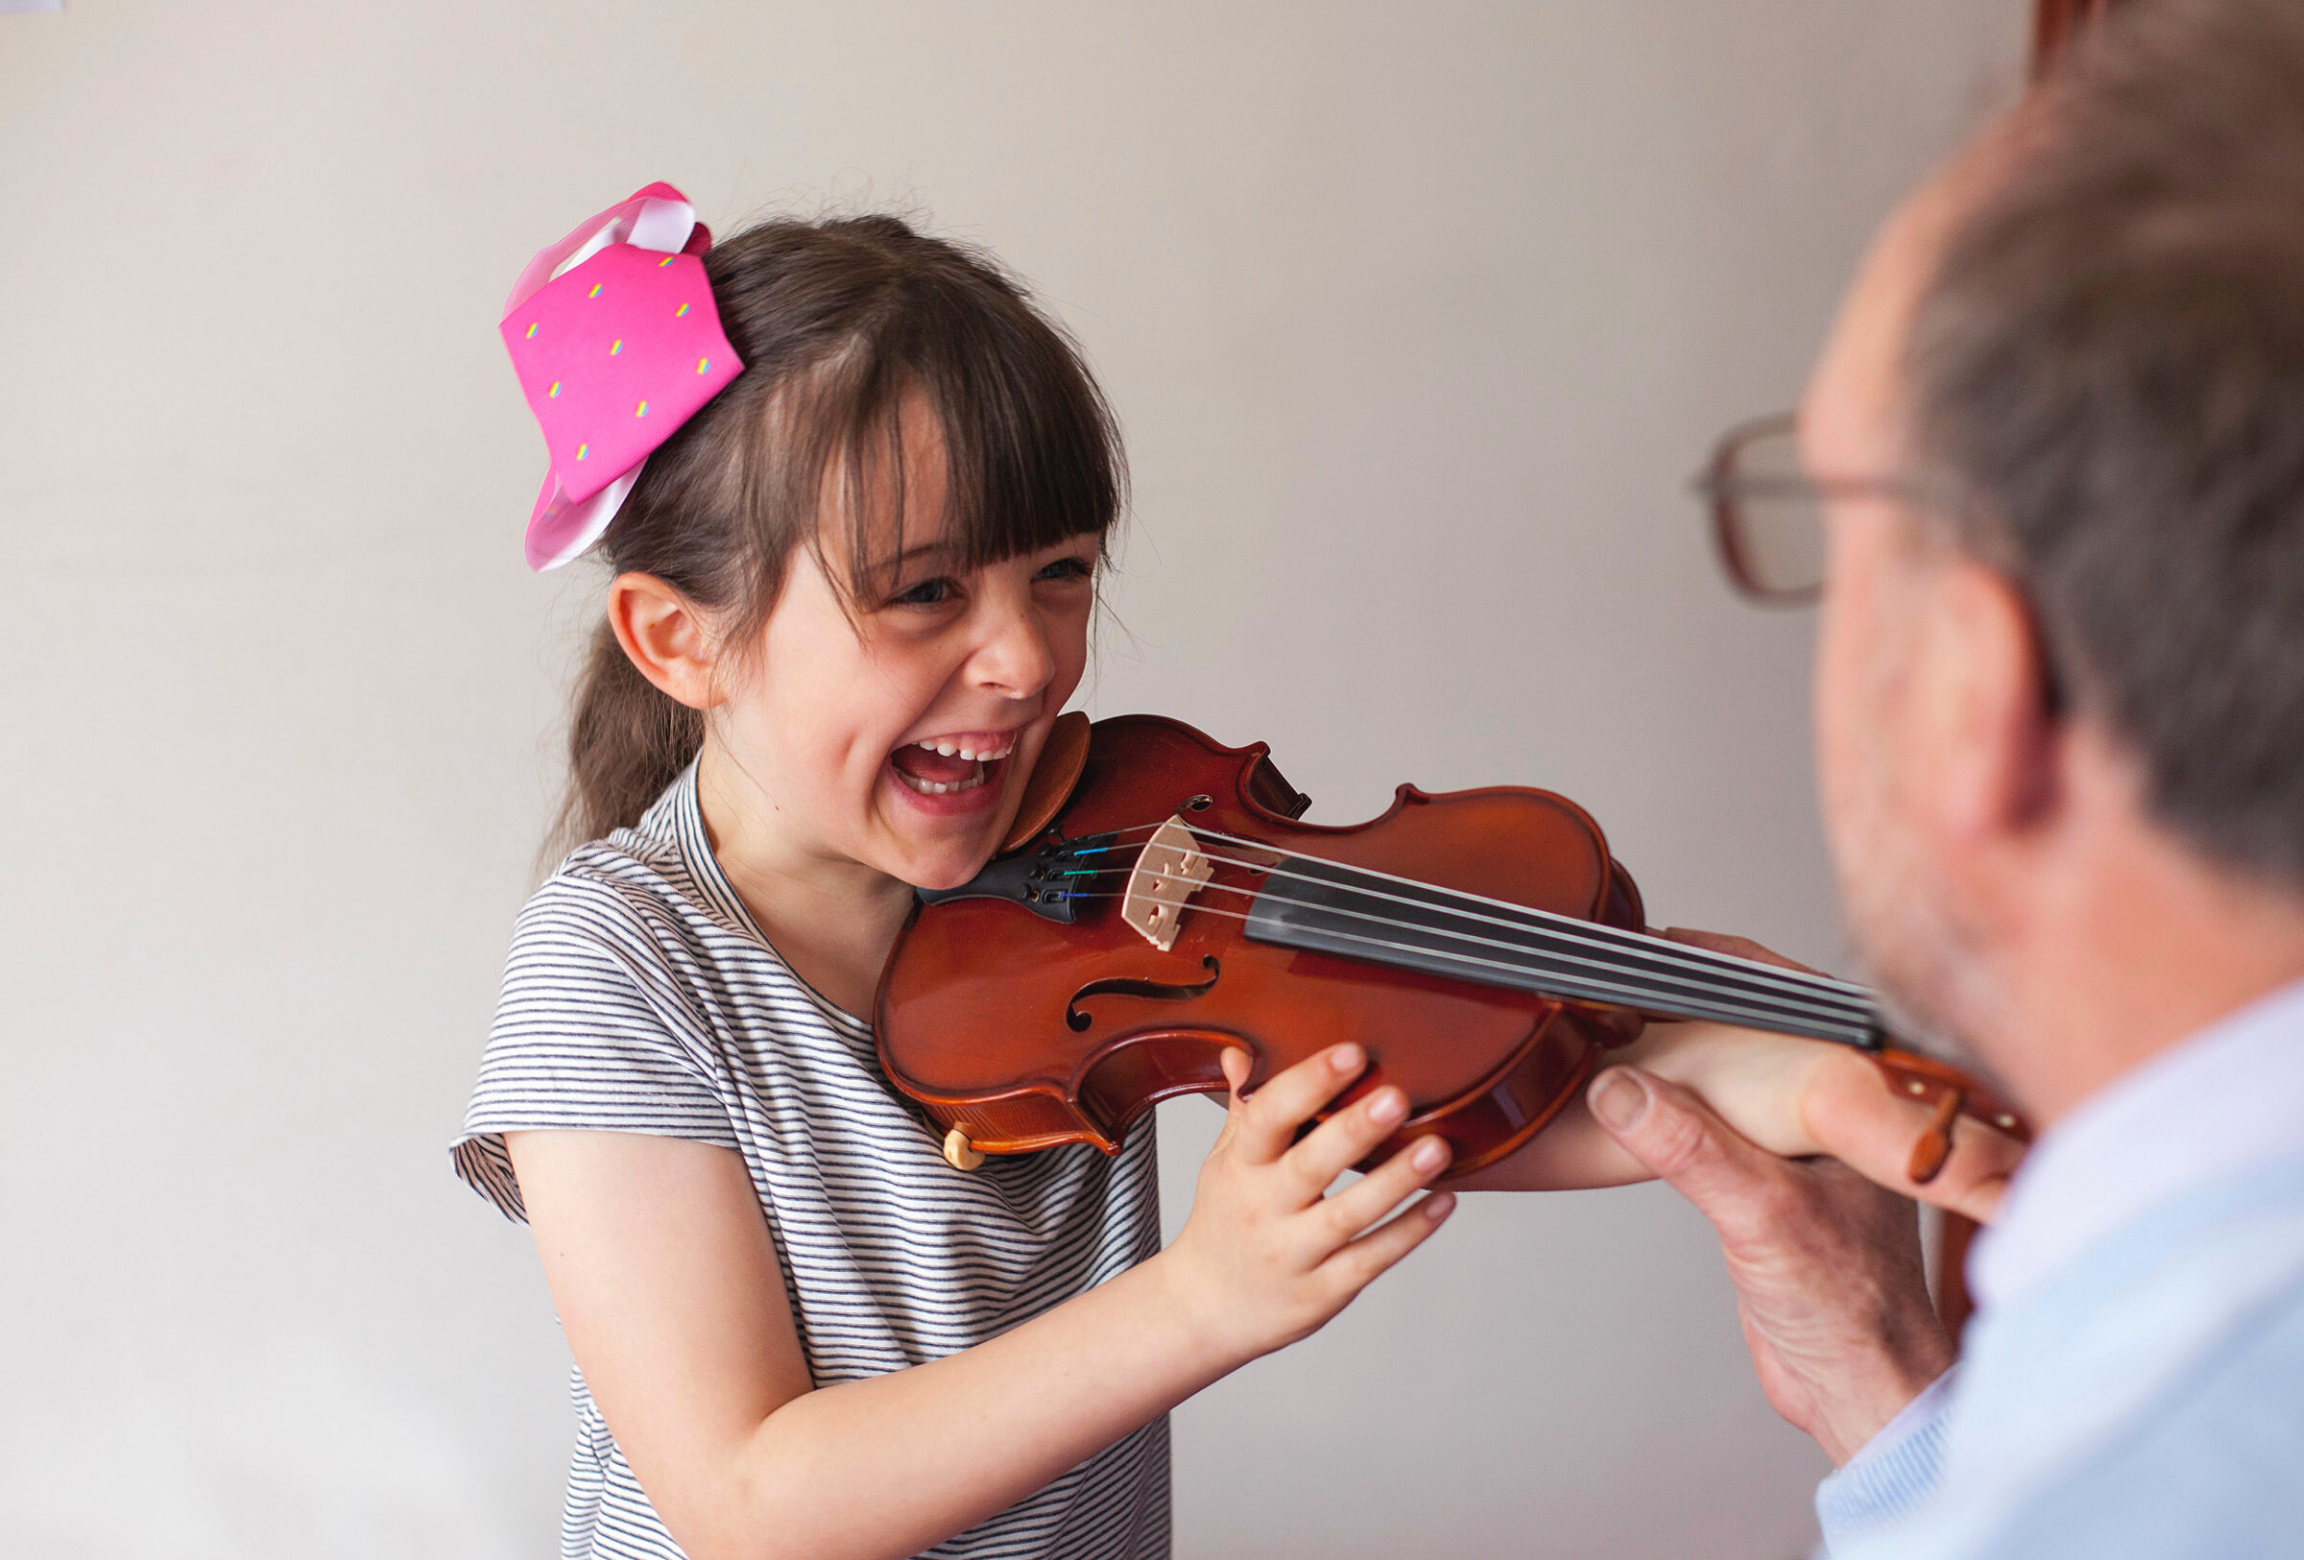 Smiling girl holding violin while her teacher helps position her hands